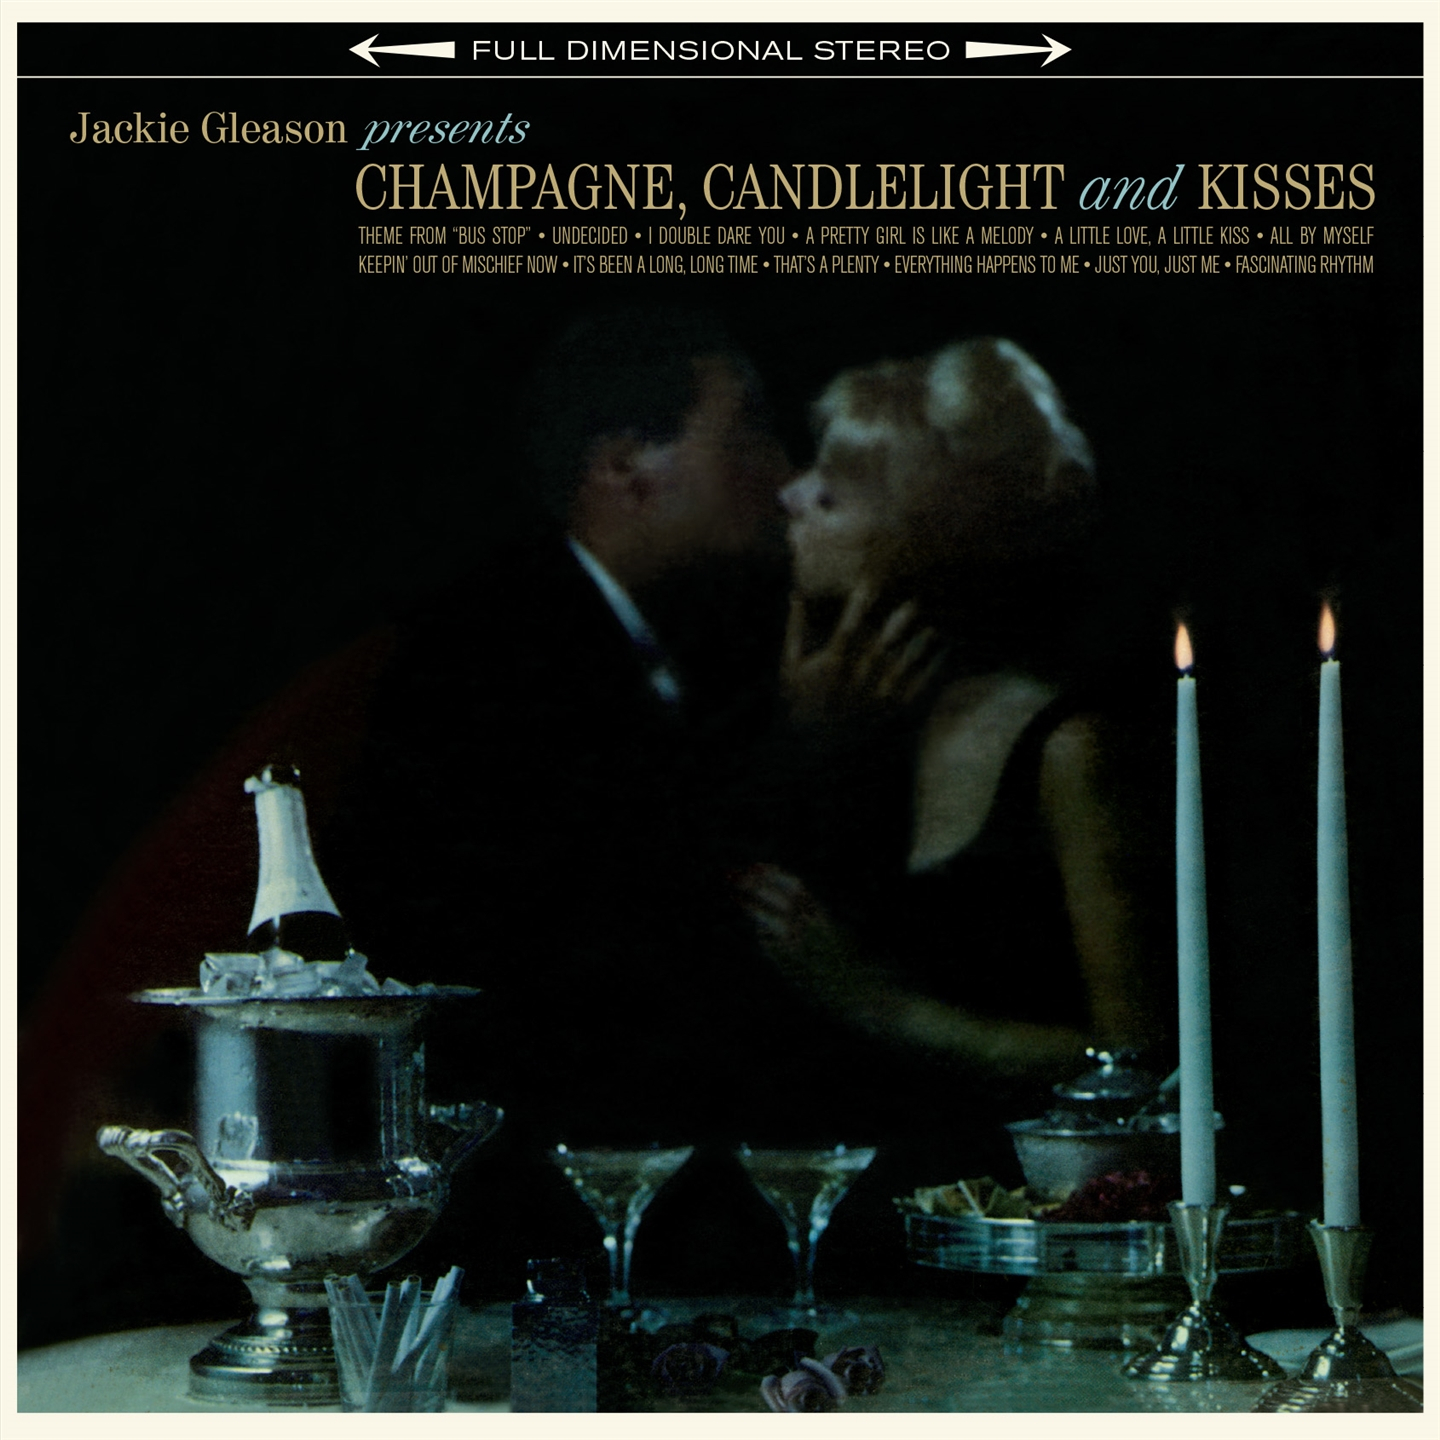 CHAMPAGNE, CANDLELIGHT & KISSES [LP]